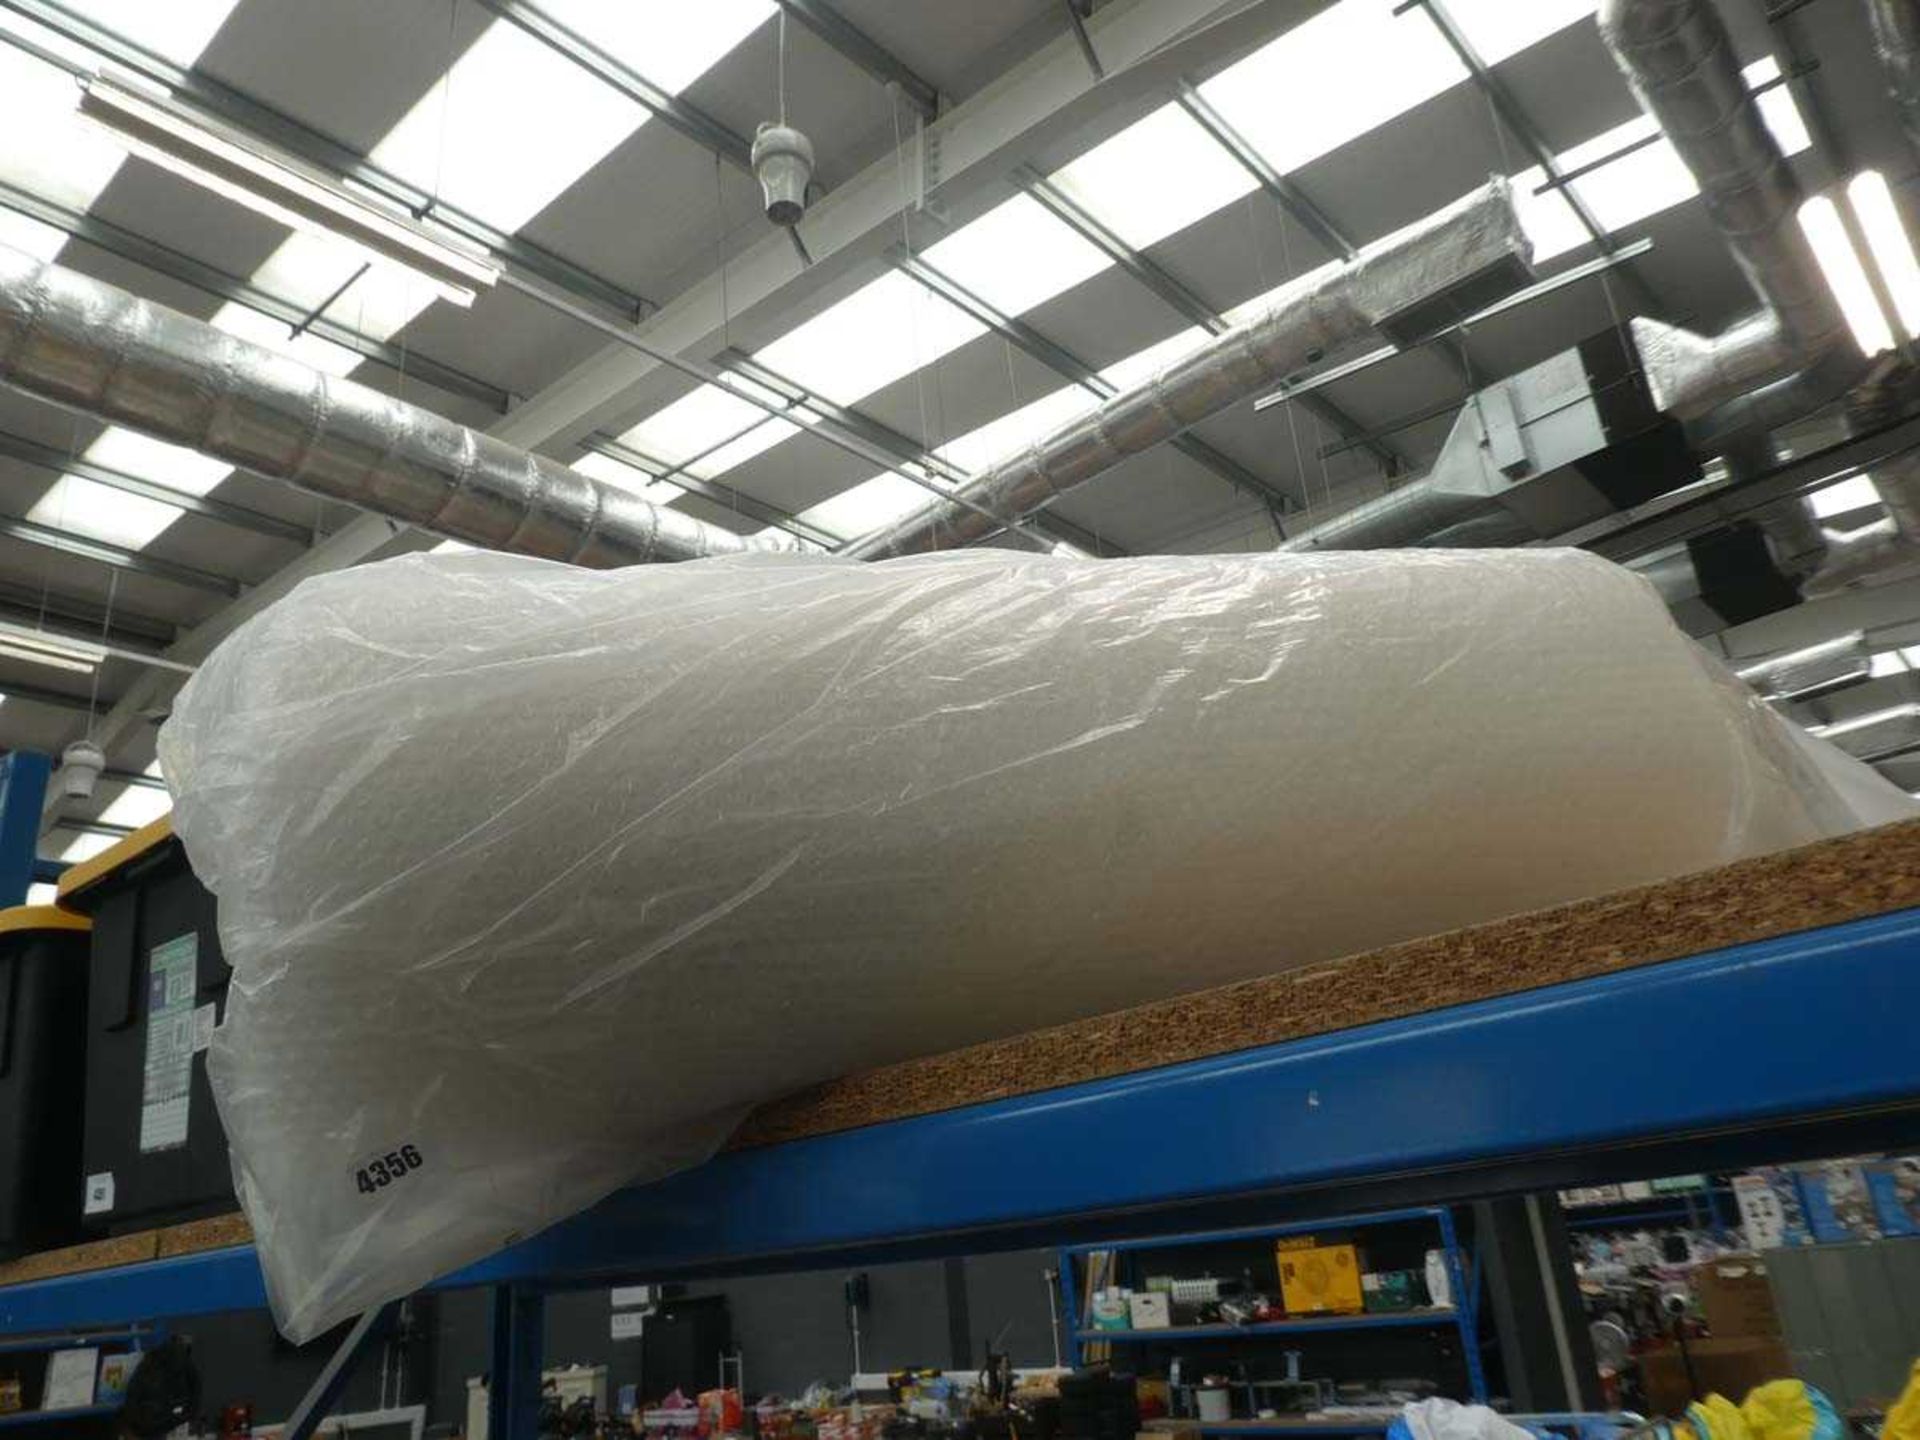 Thin roll of bubble wrap